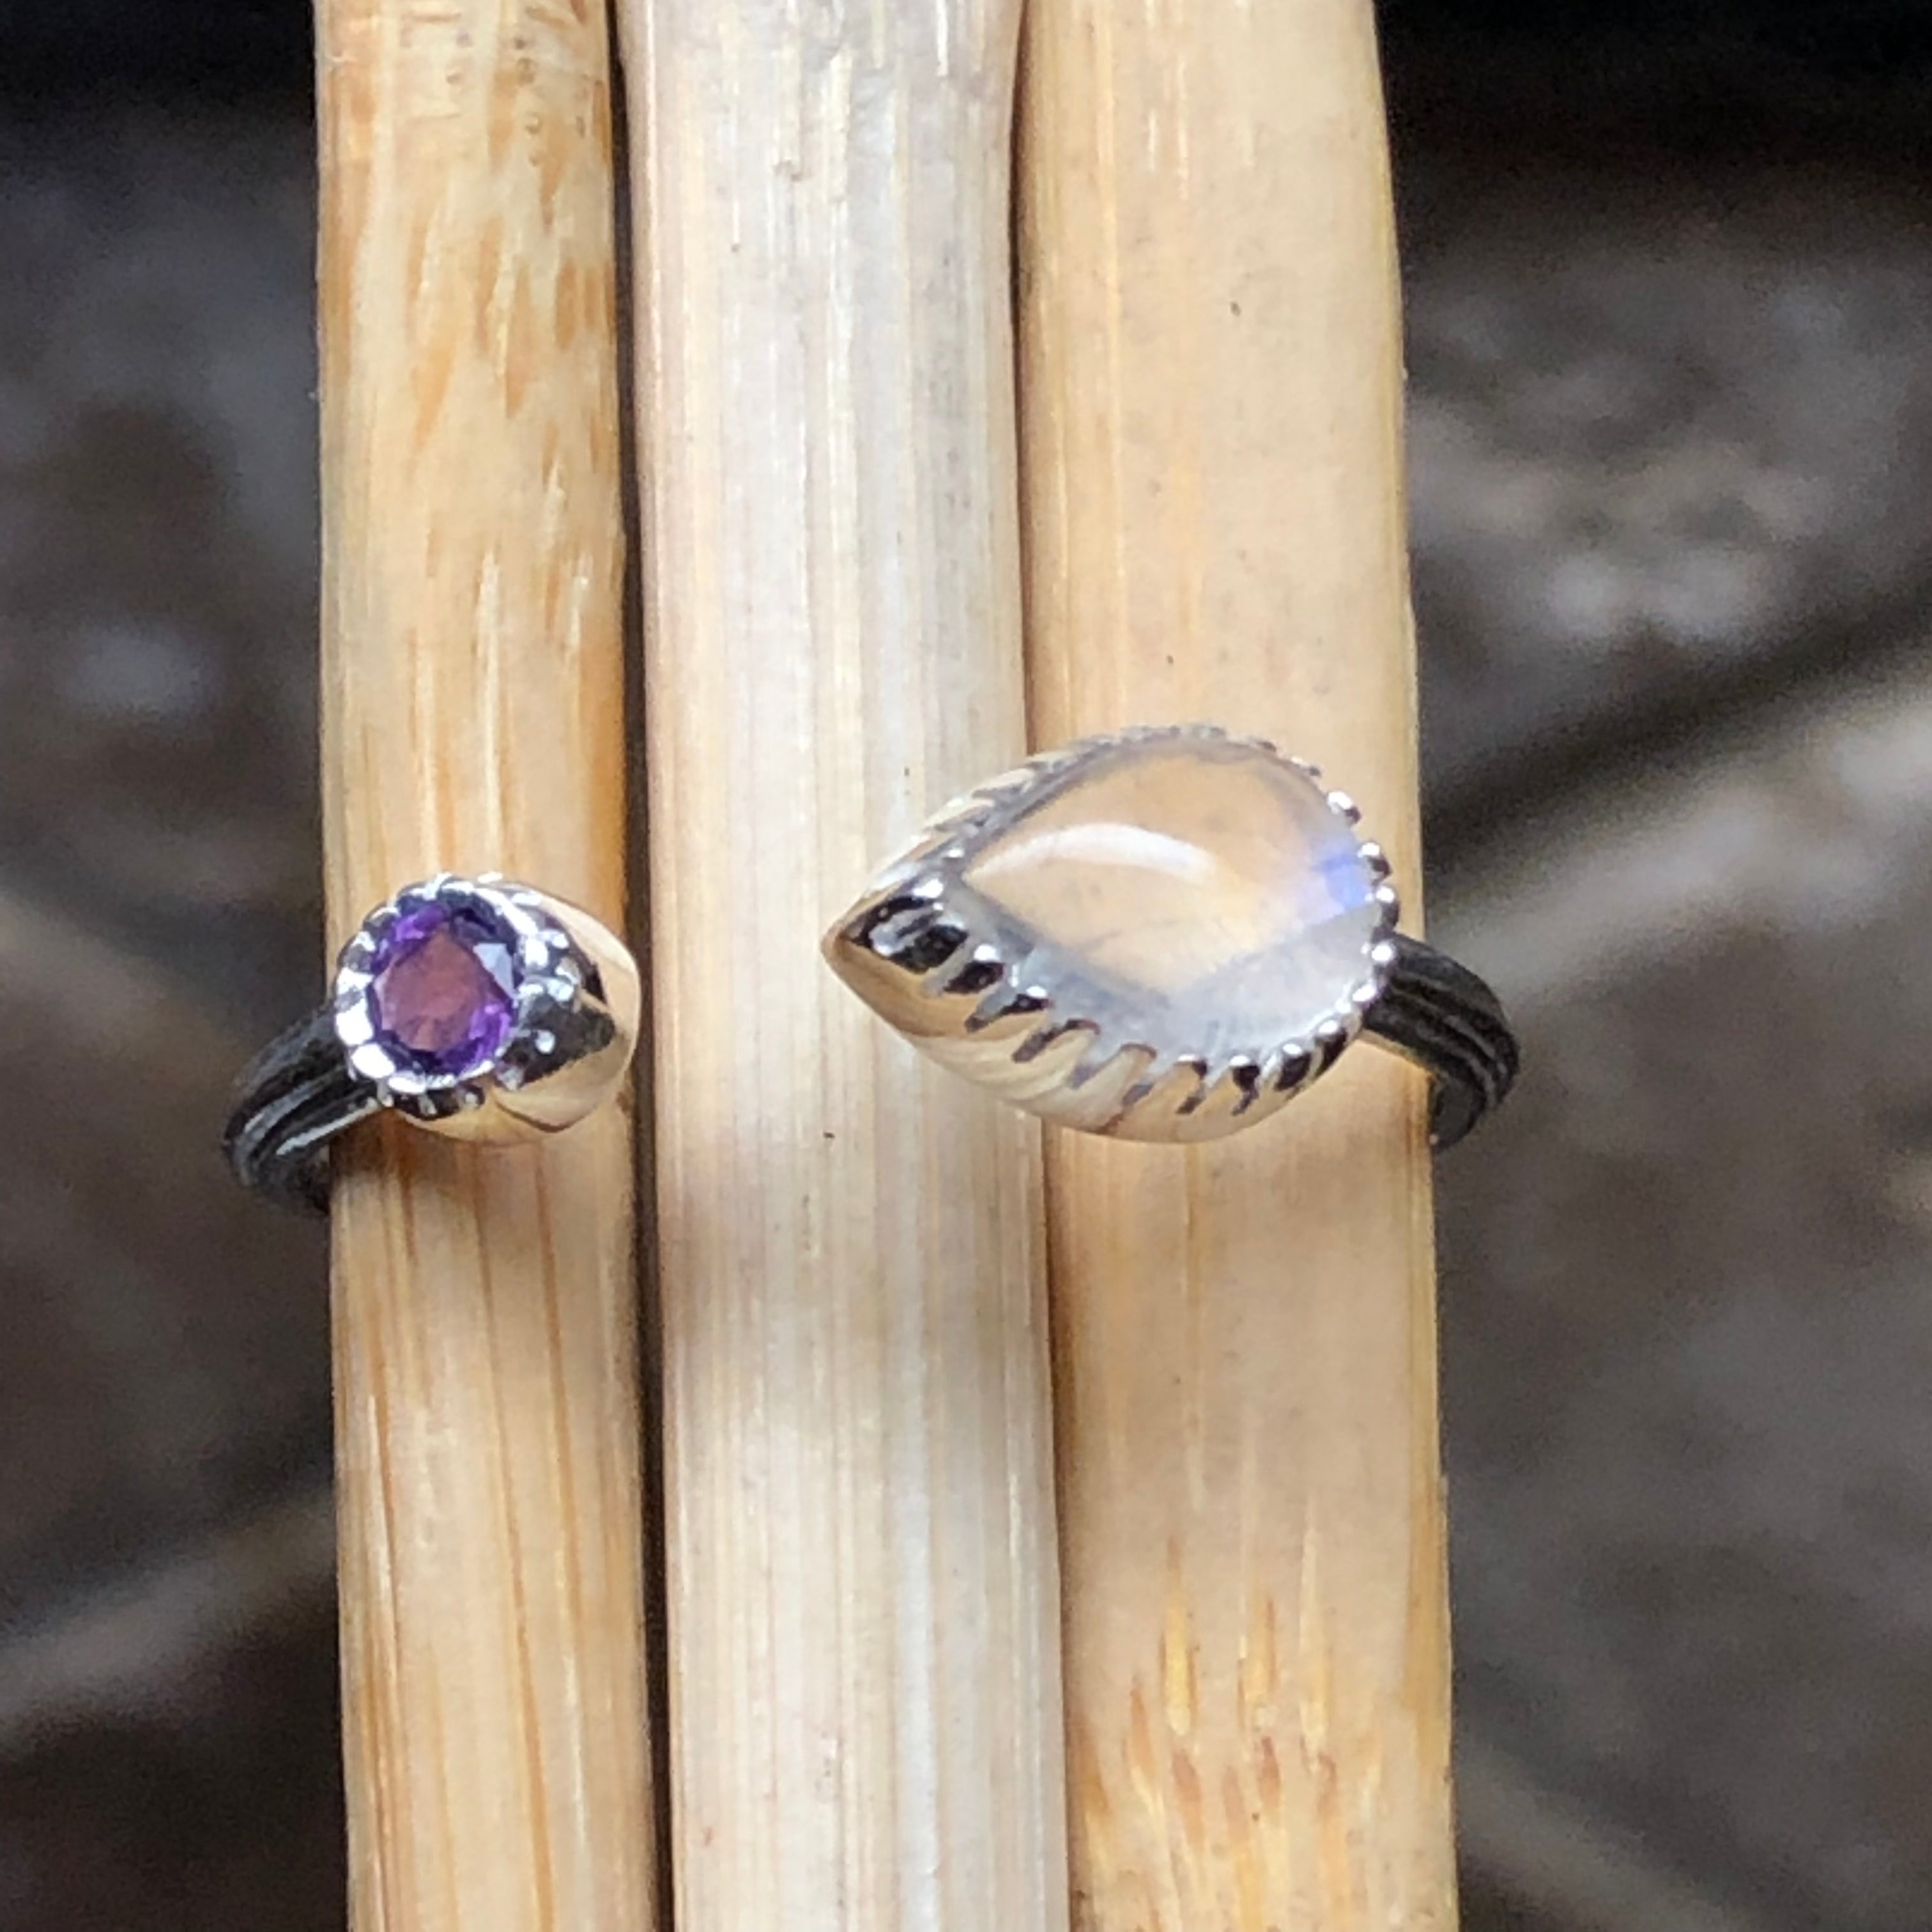 Genuine Rainbow Moonstone, Amethyst 925 Solid Sterling Silver Open Band Ring Size 6.5, 7, 8 - Natural Rocks by Kala